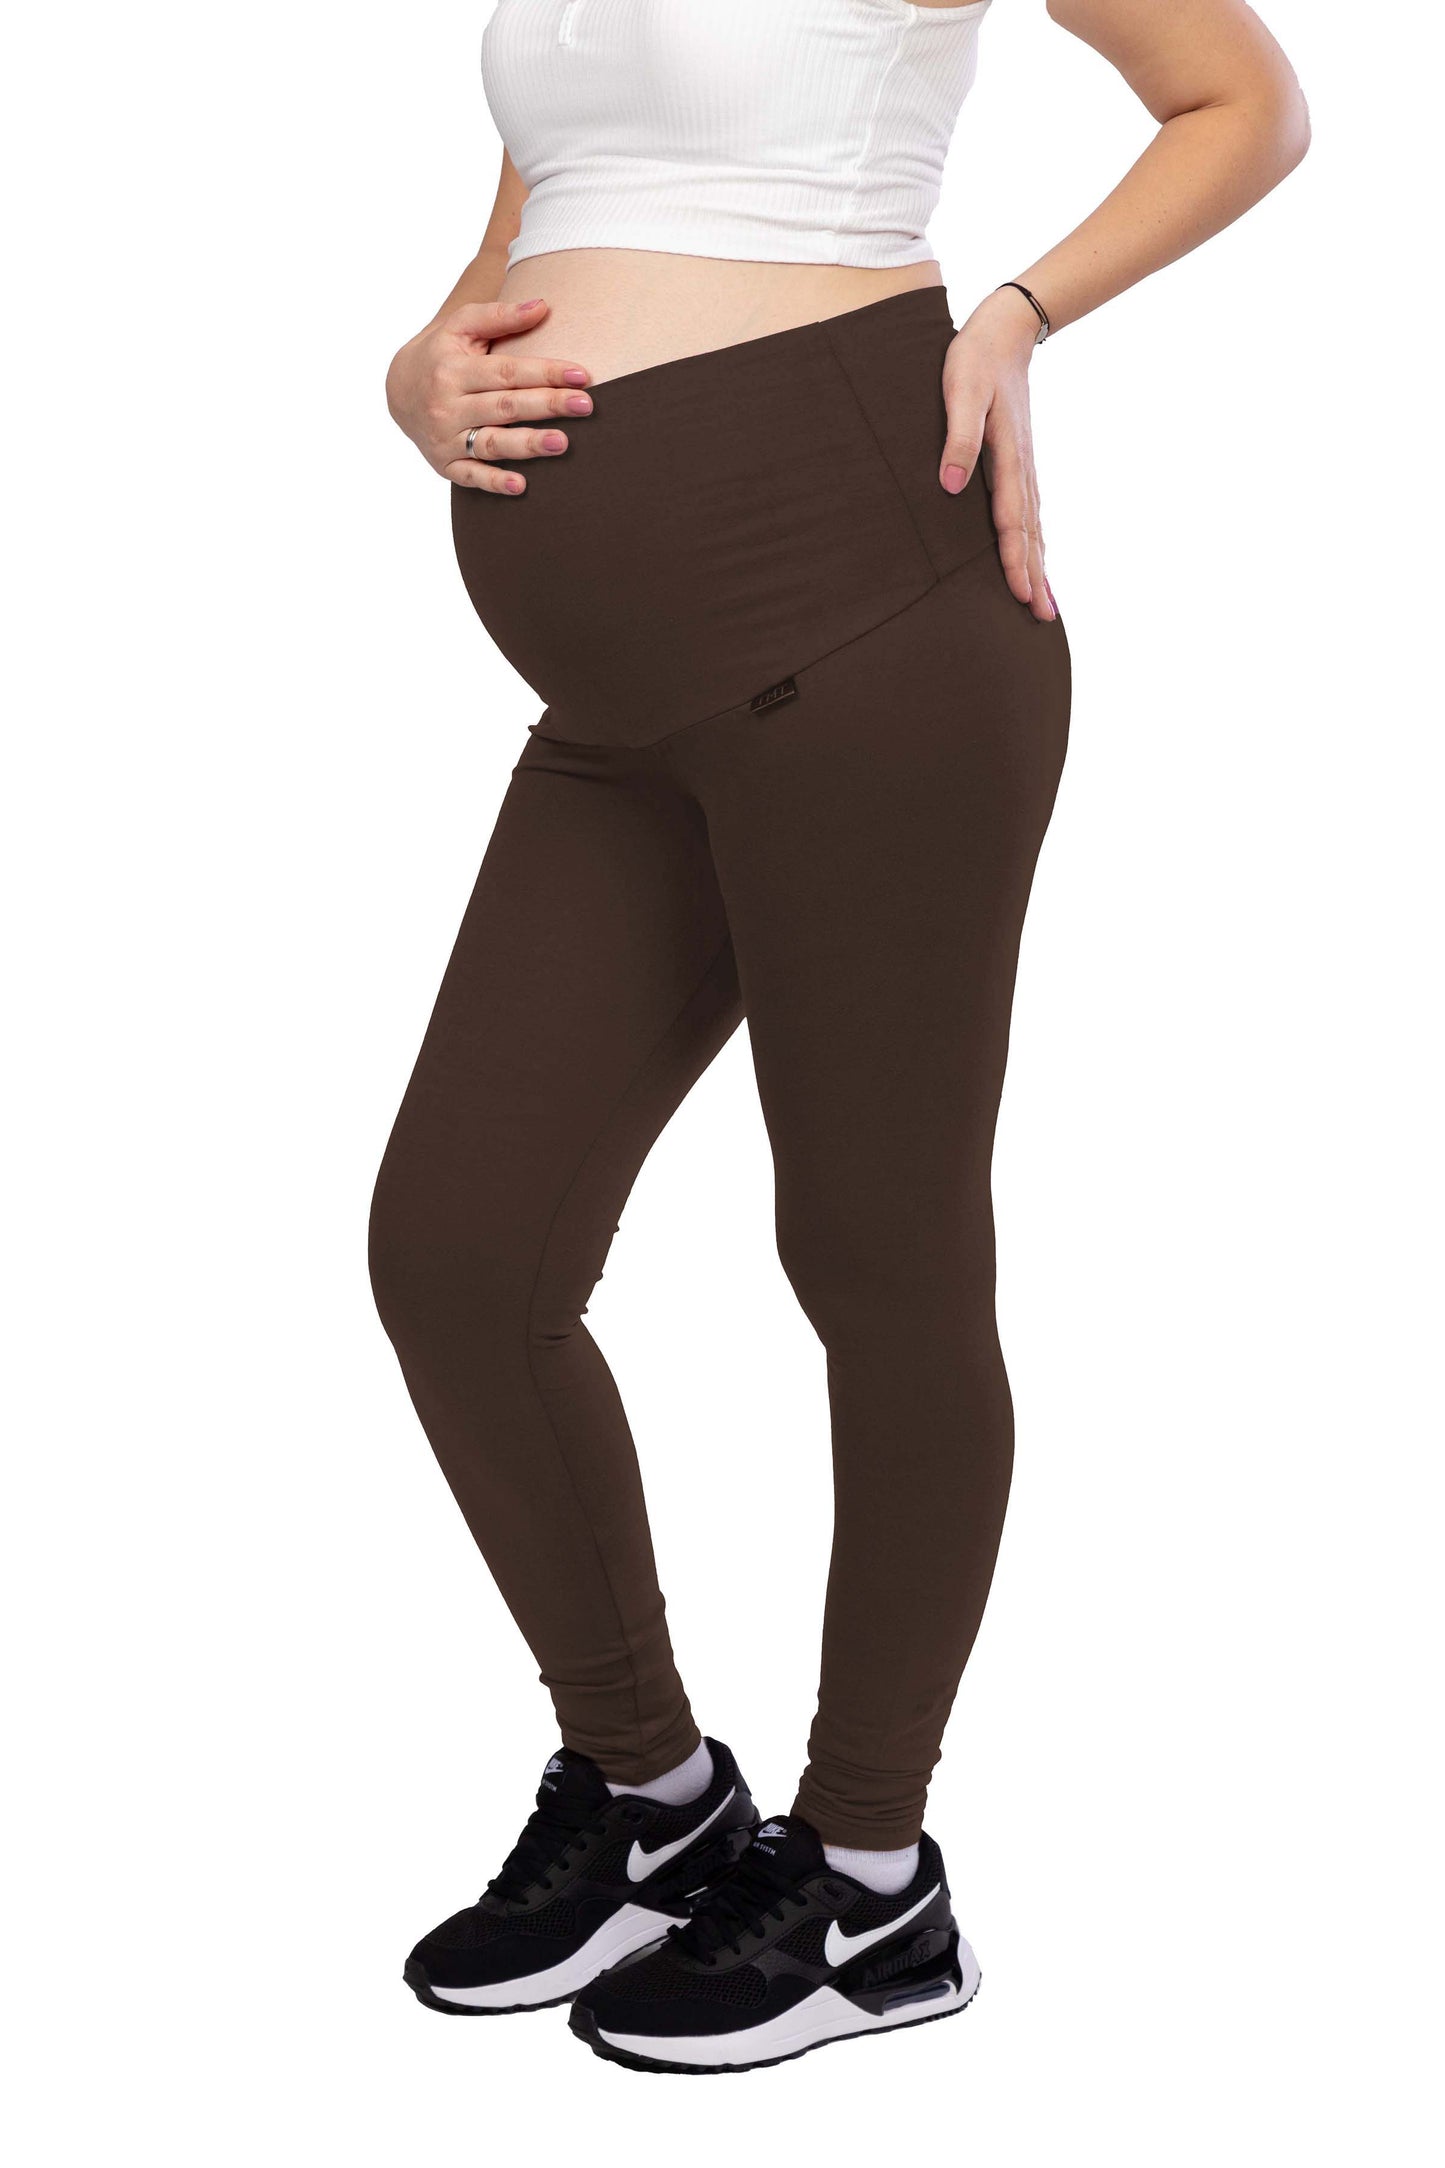 Maternity Leggings for temperate weather 3 color options